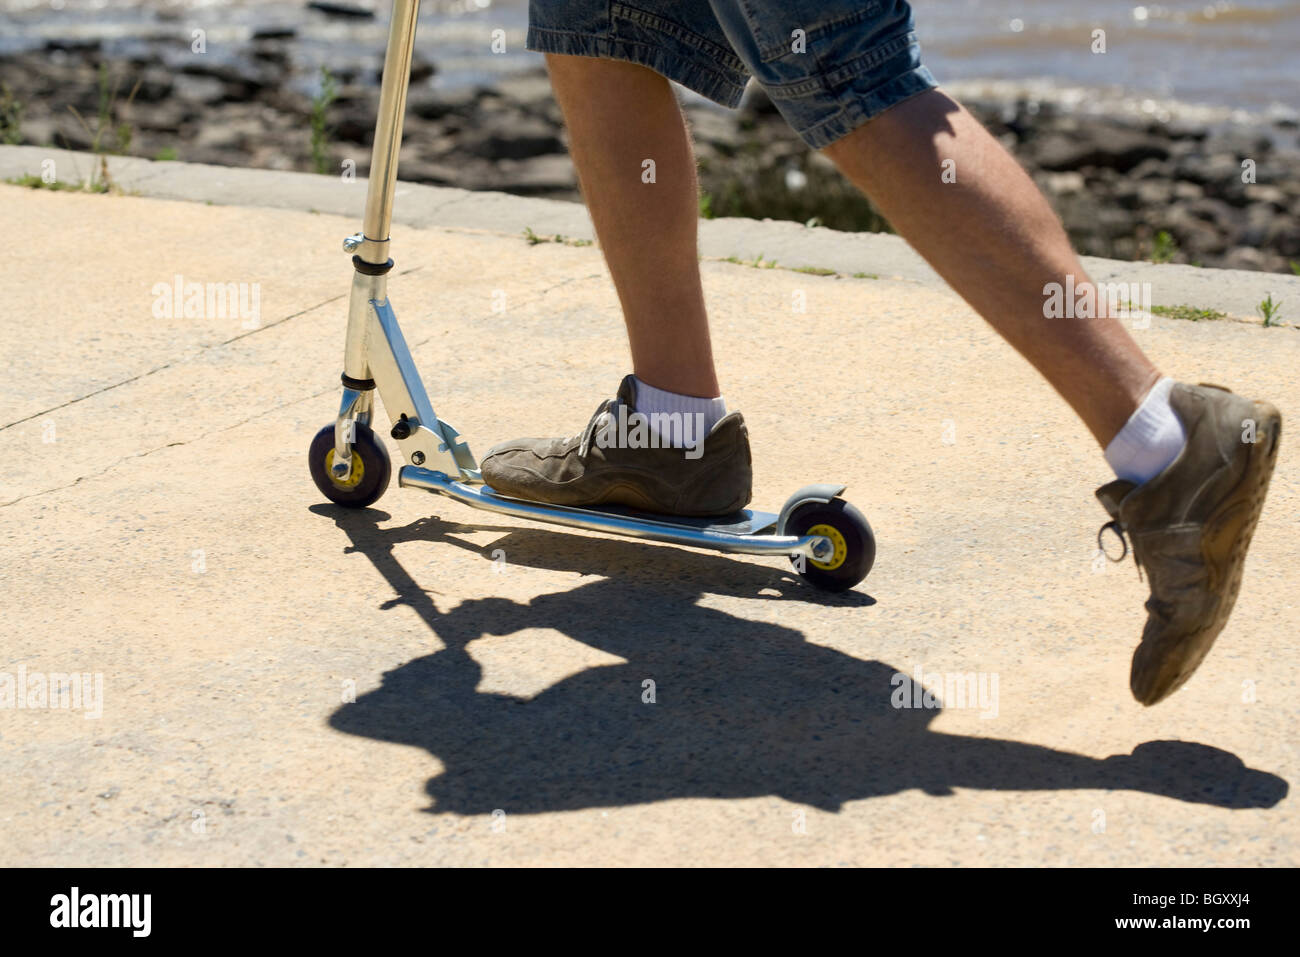 Riding push scooter at seaside Stock Photo